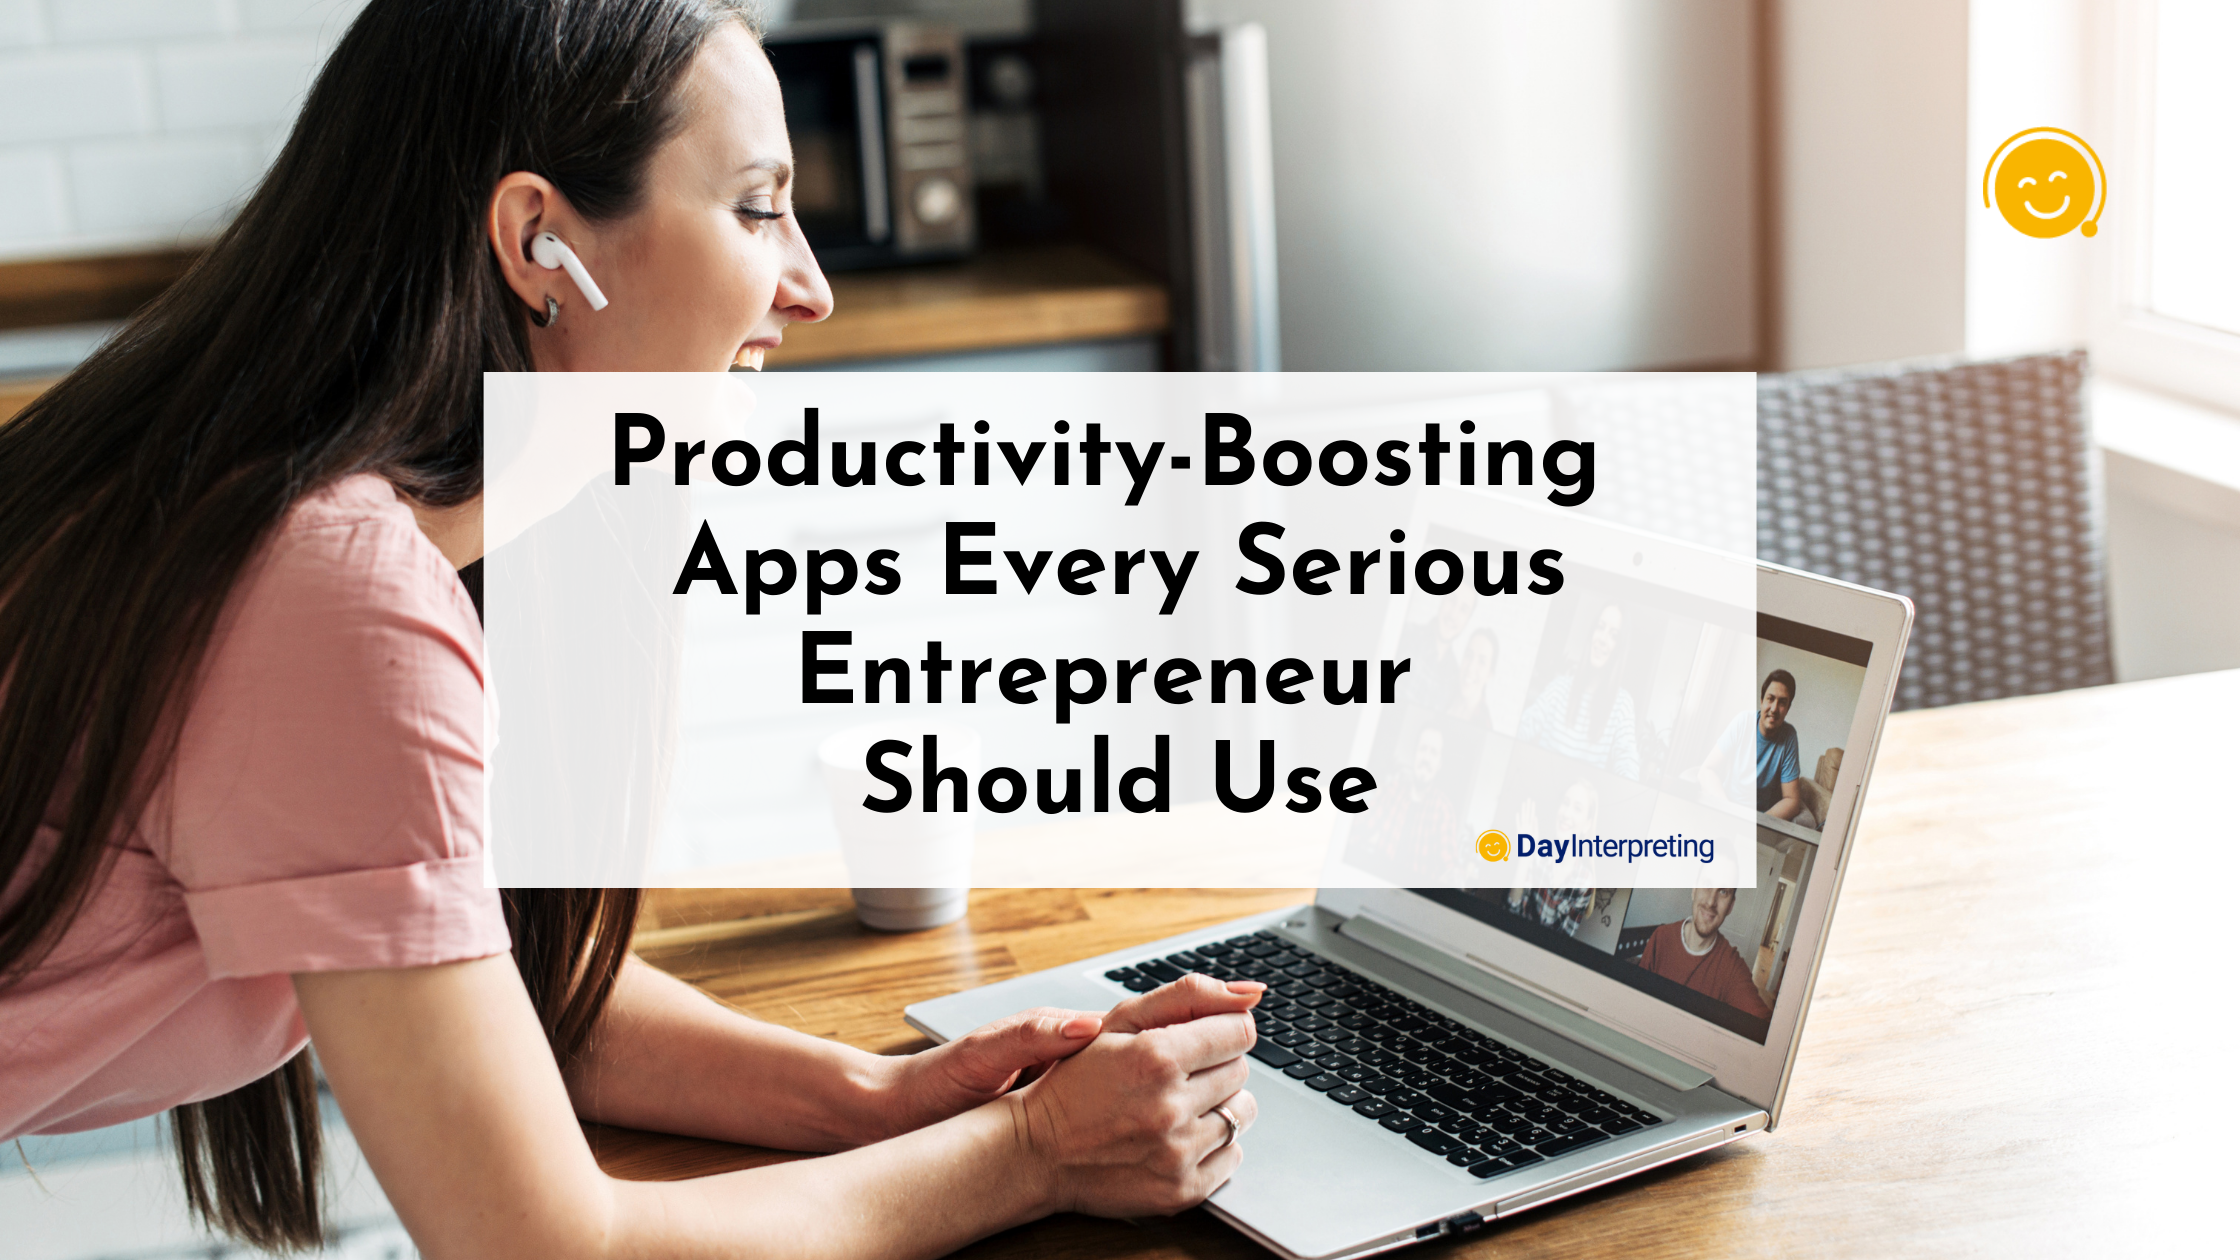 Productivity-Boosting Apps Every Serious Entrepreneur Should Use